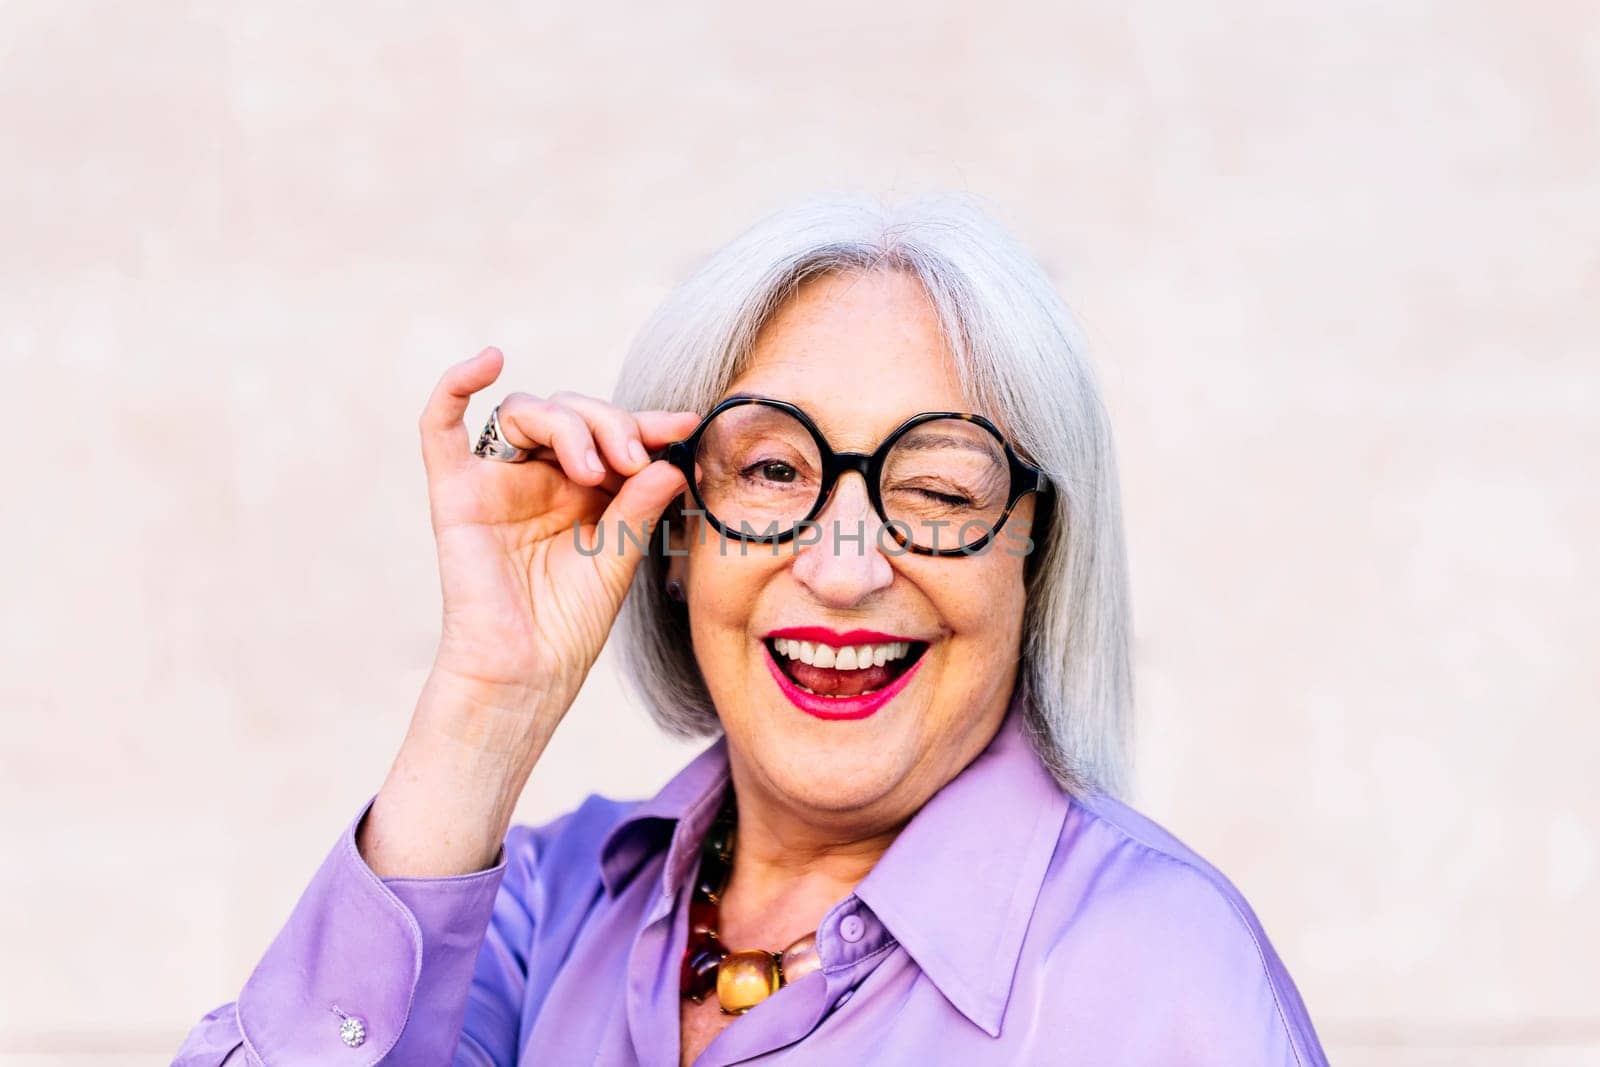 portrait of nice senior woman in glasses smiling and winking looking at camera, concept of elderly people happiness and active lifestyle, copy space for text